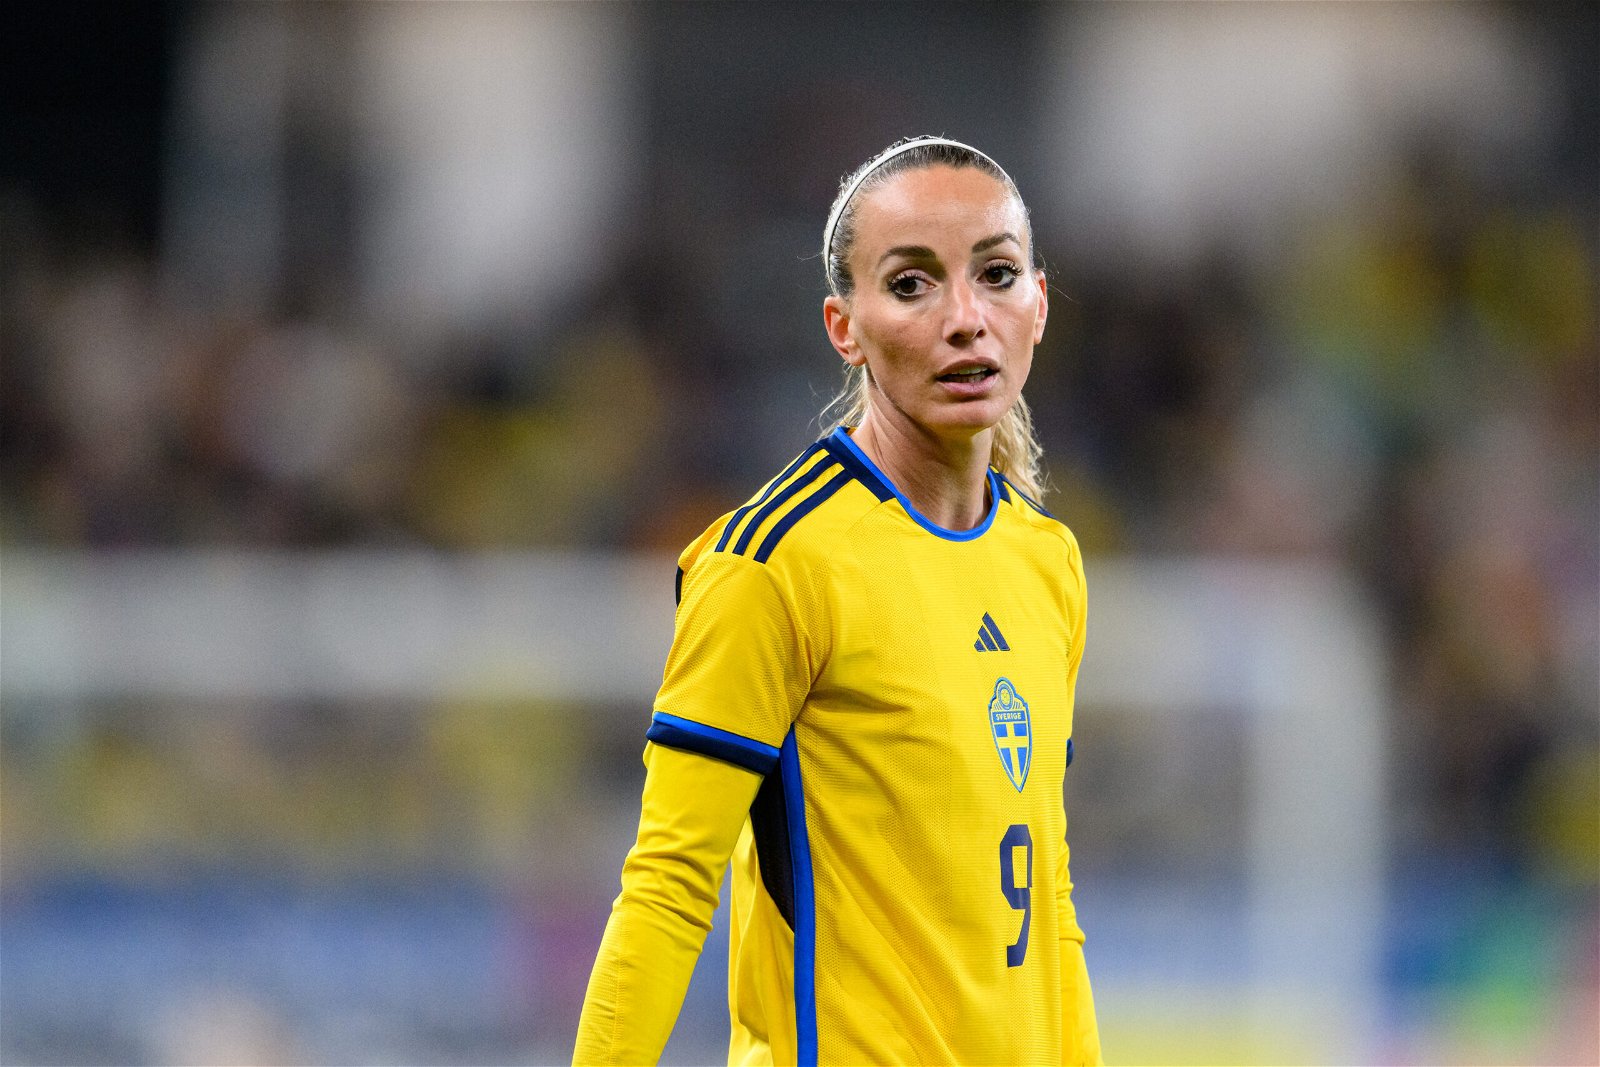 Kosovare Asllani is One of the Hottest Female Soccer Players in Sweden